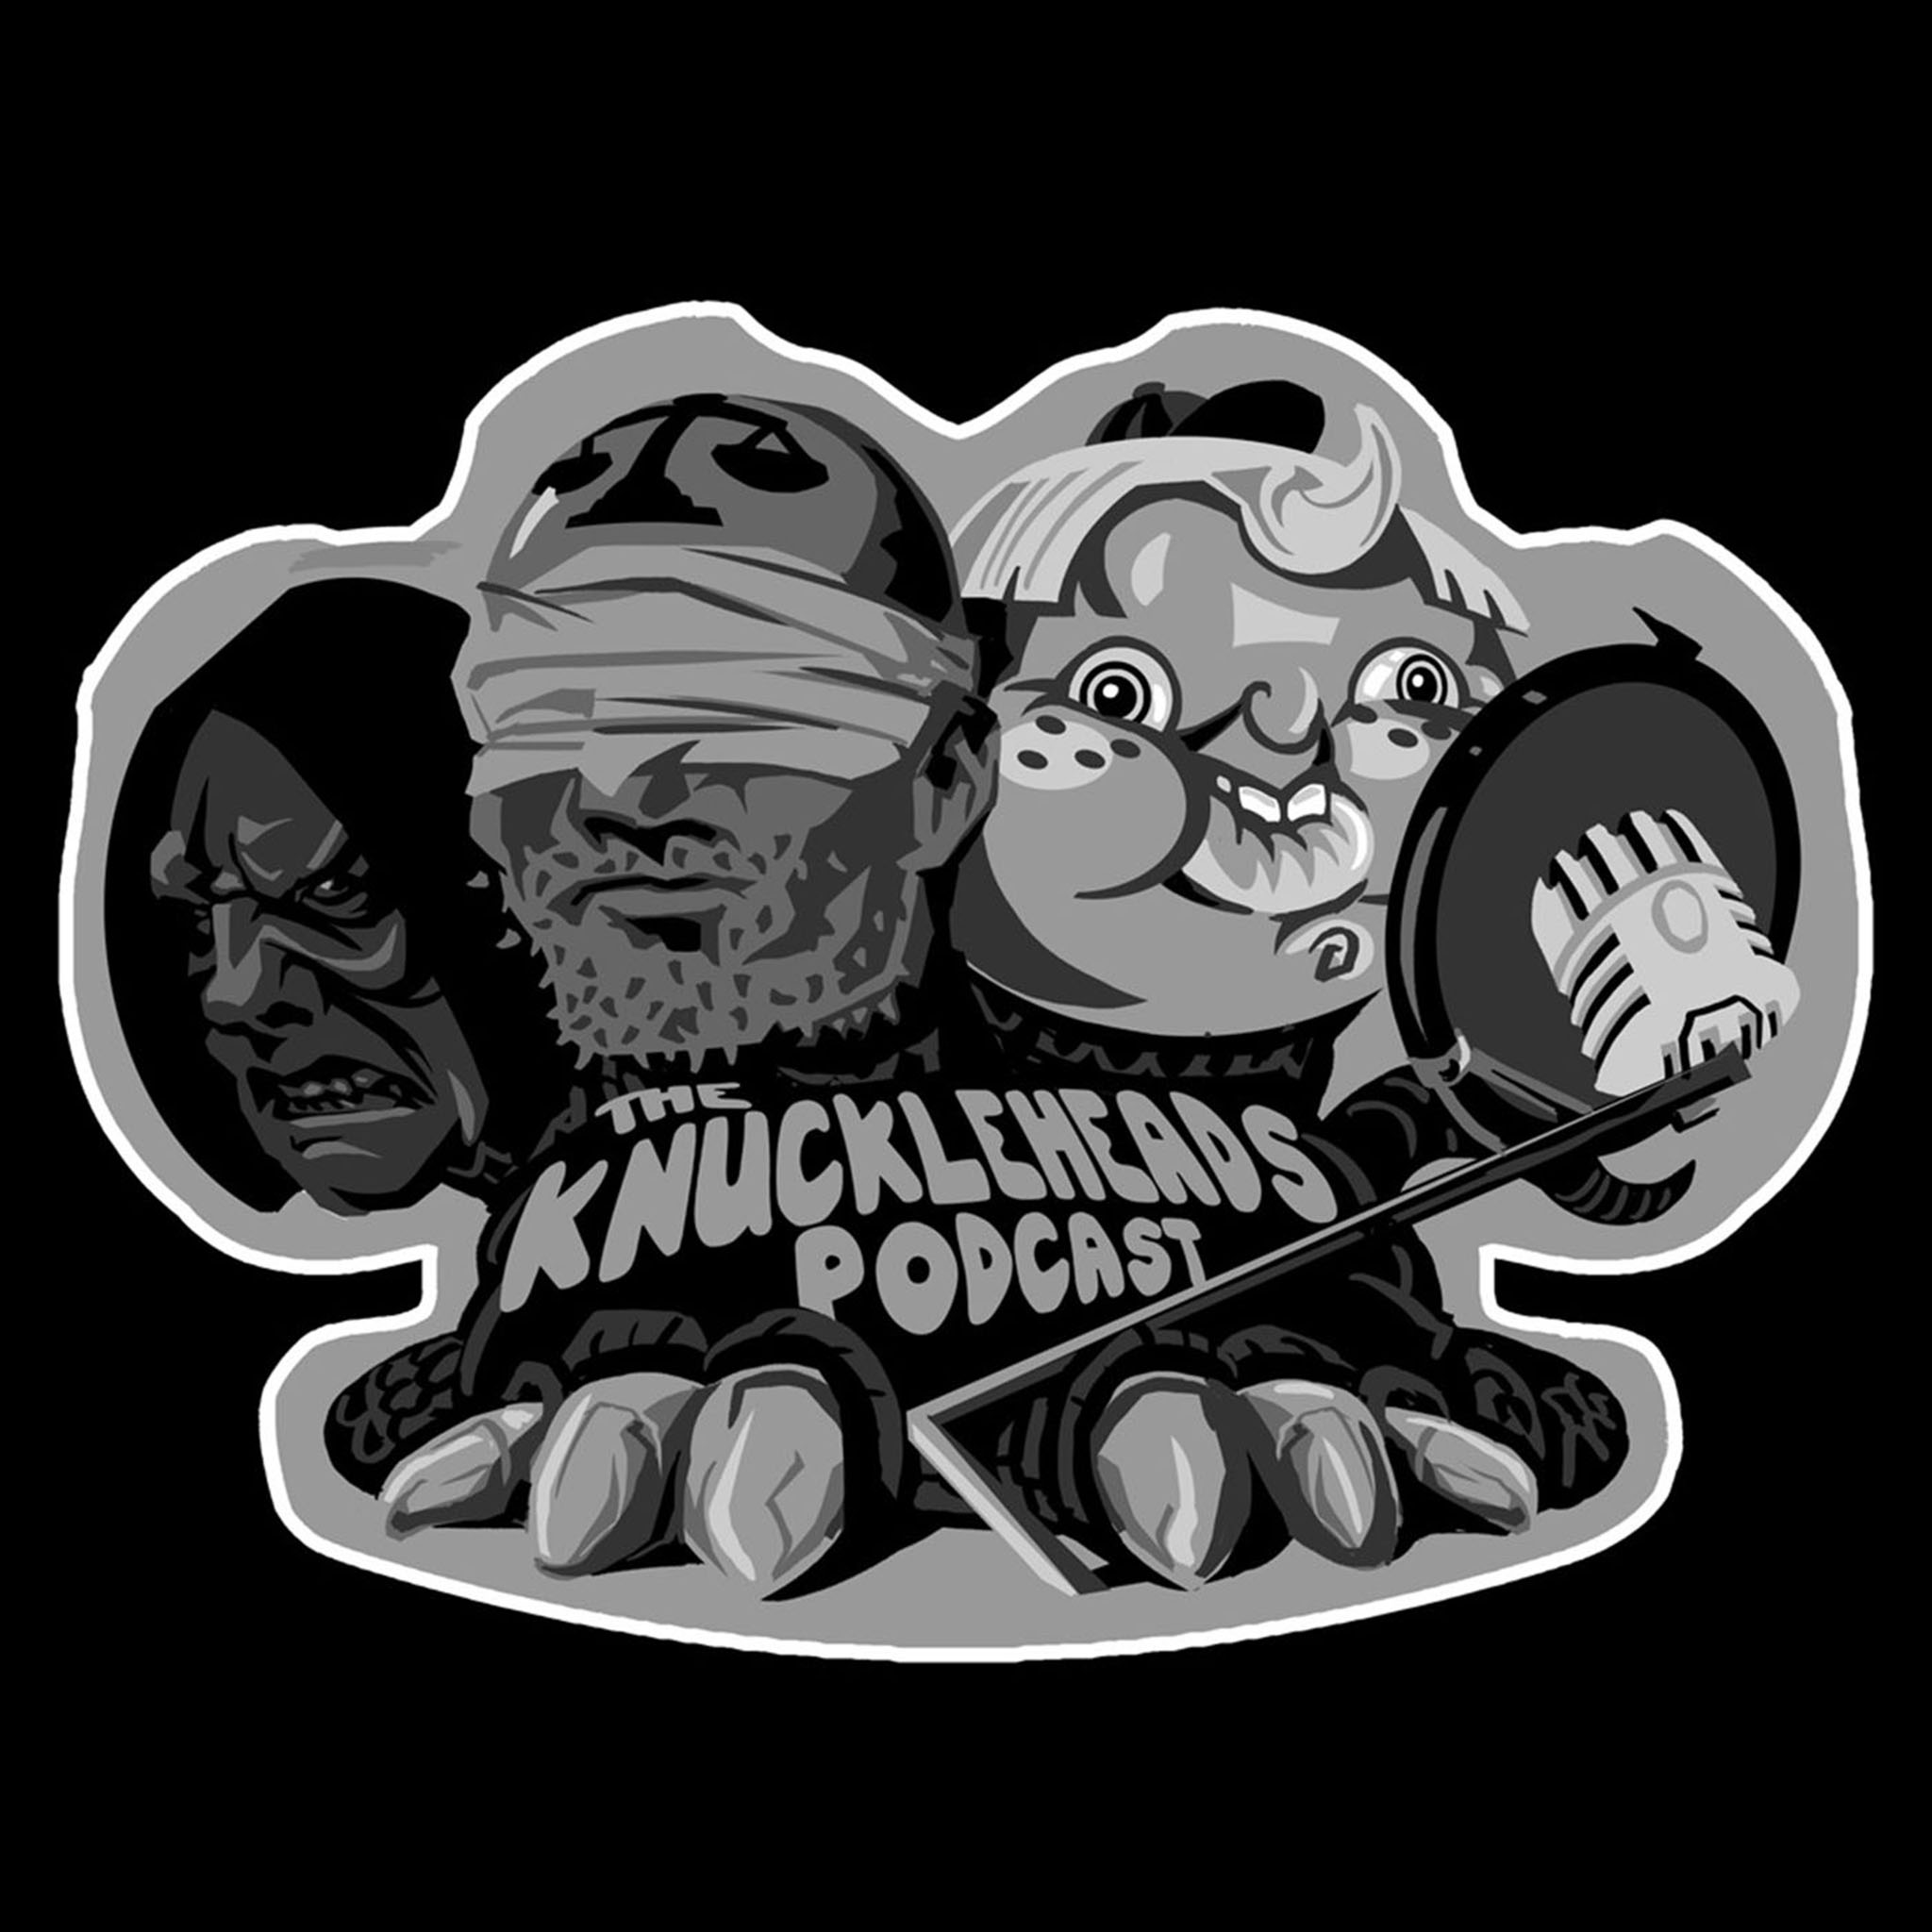 TheKnuckleHeadsPodcast